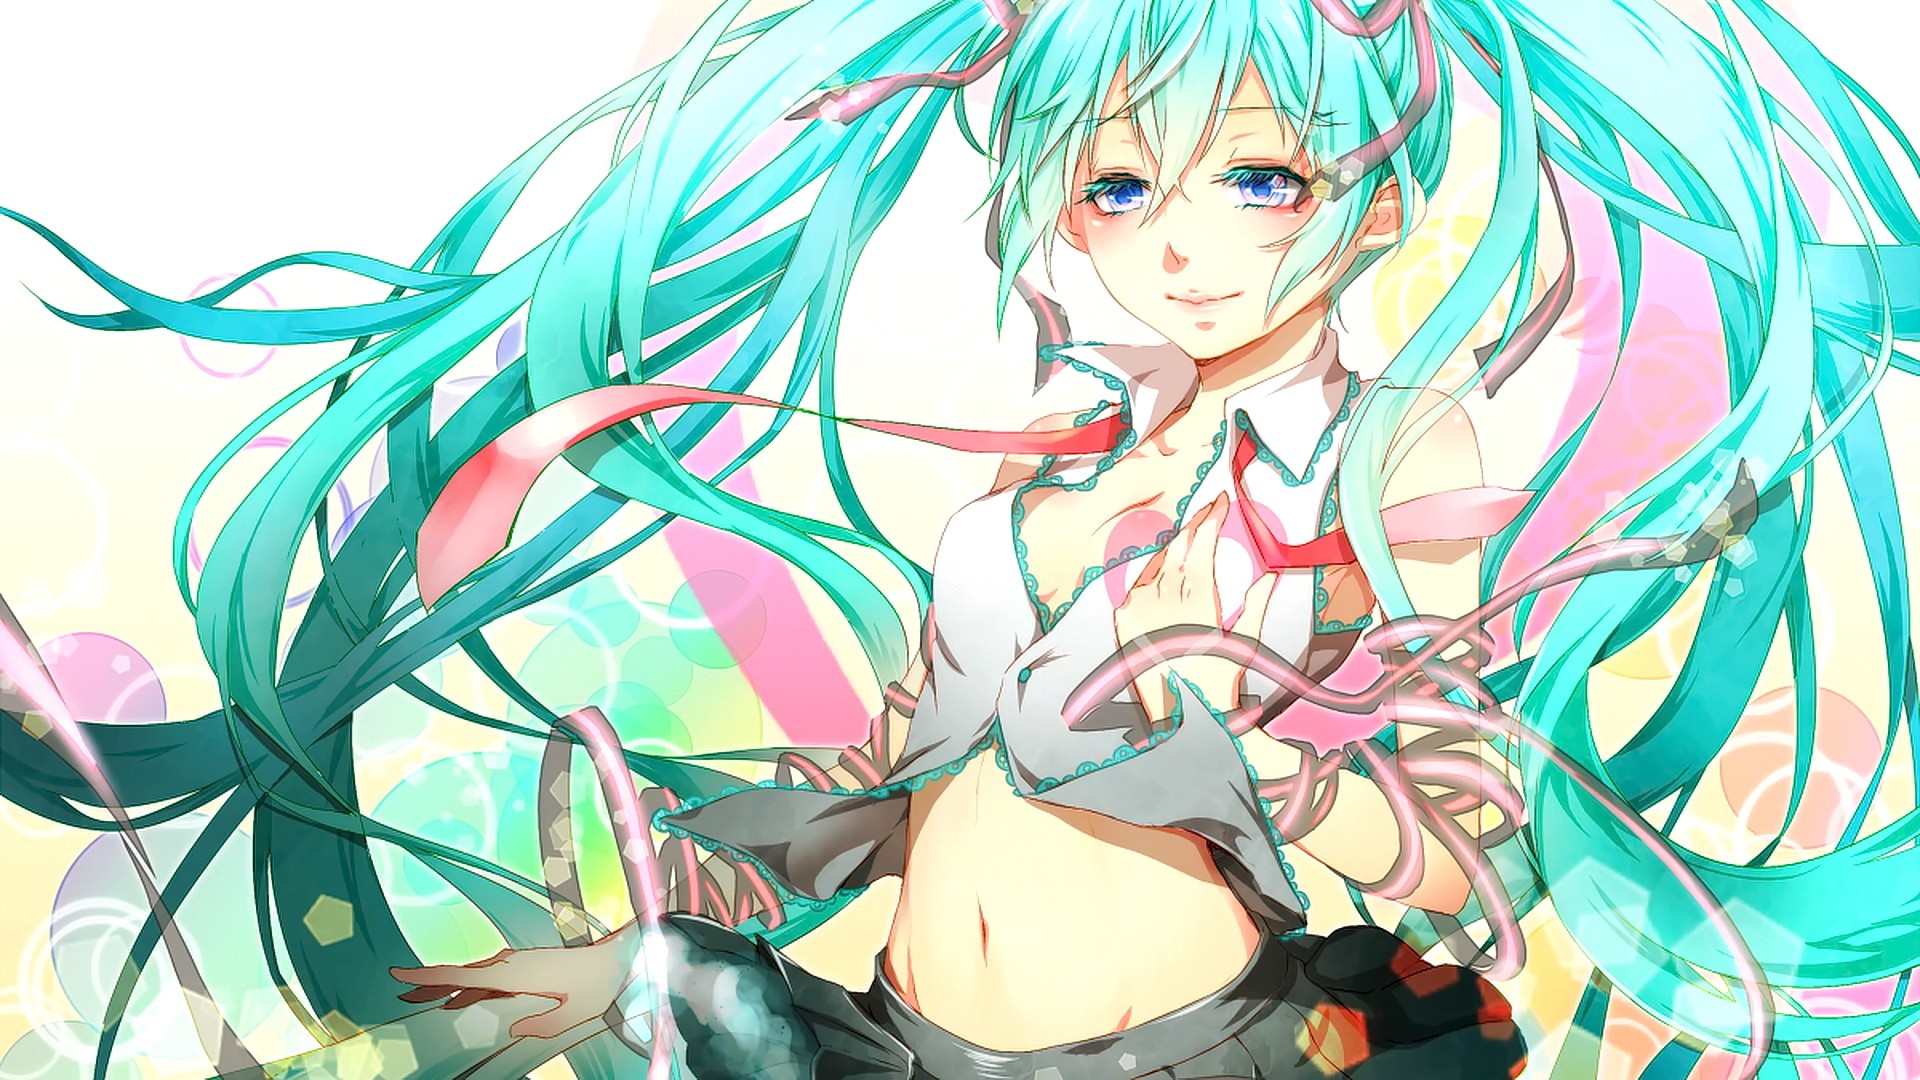 Anime 1920x1080 anime anime girls cyan hair long hair blue eyes smiling Hatsune Miku Vocaloid looking at viewer turquoise belly